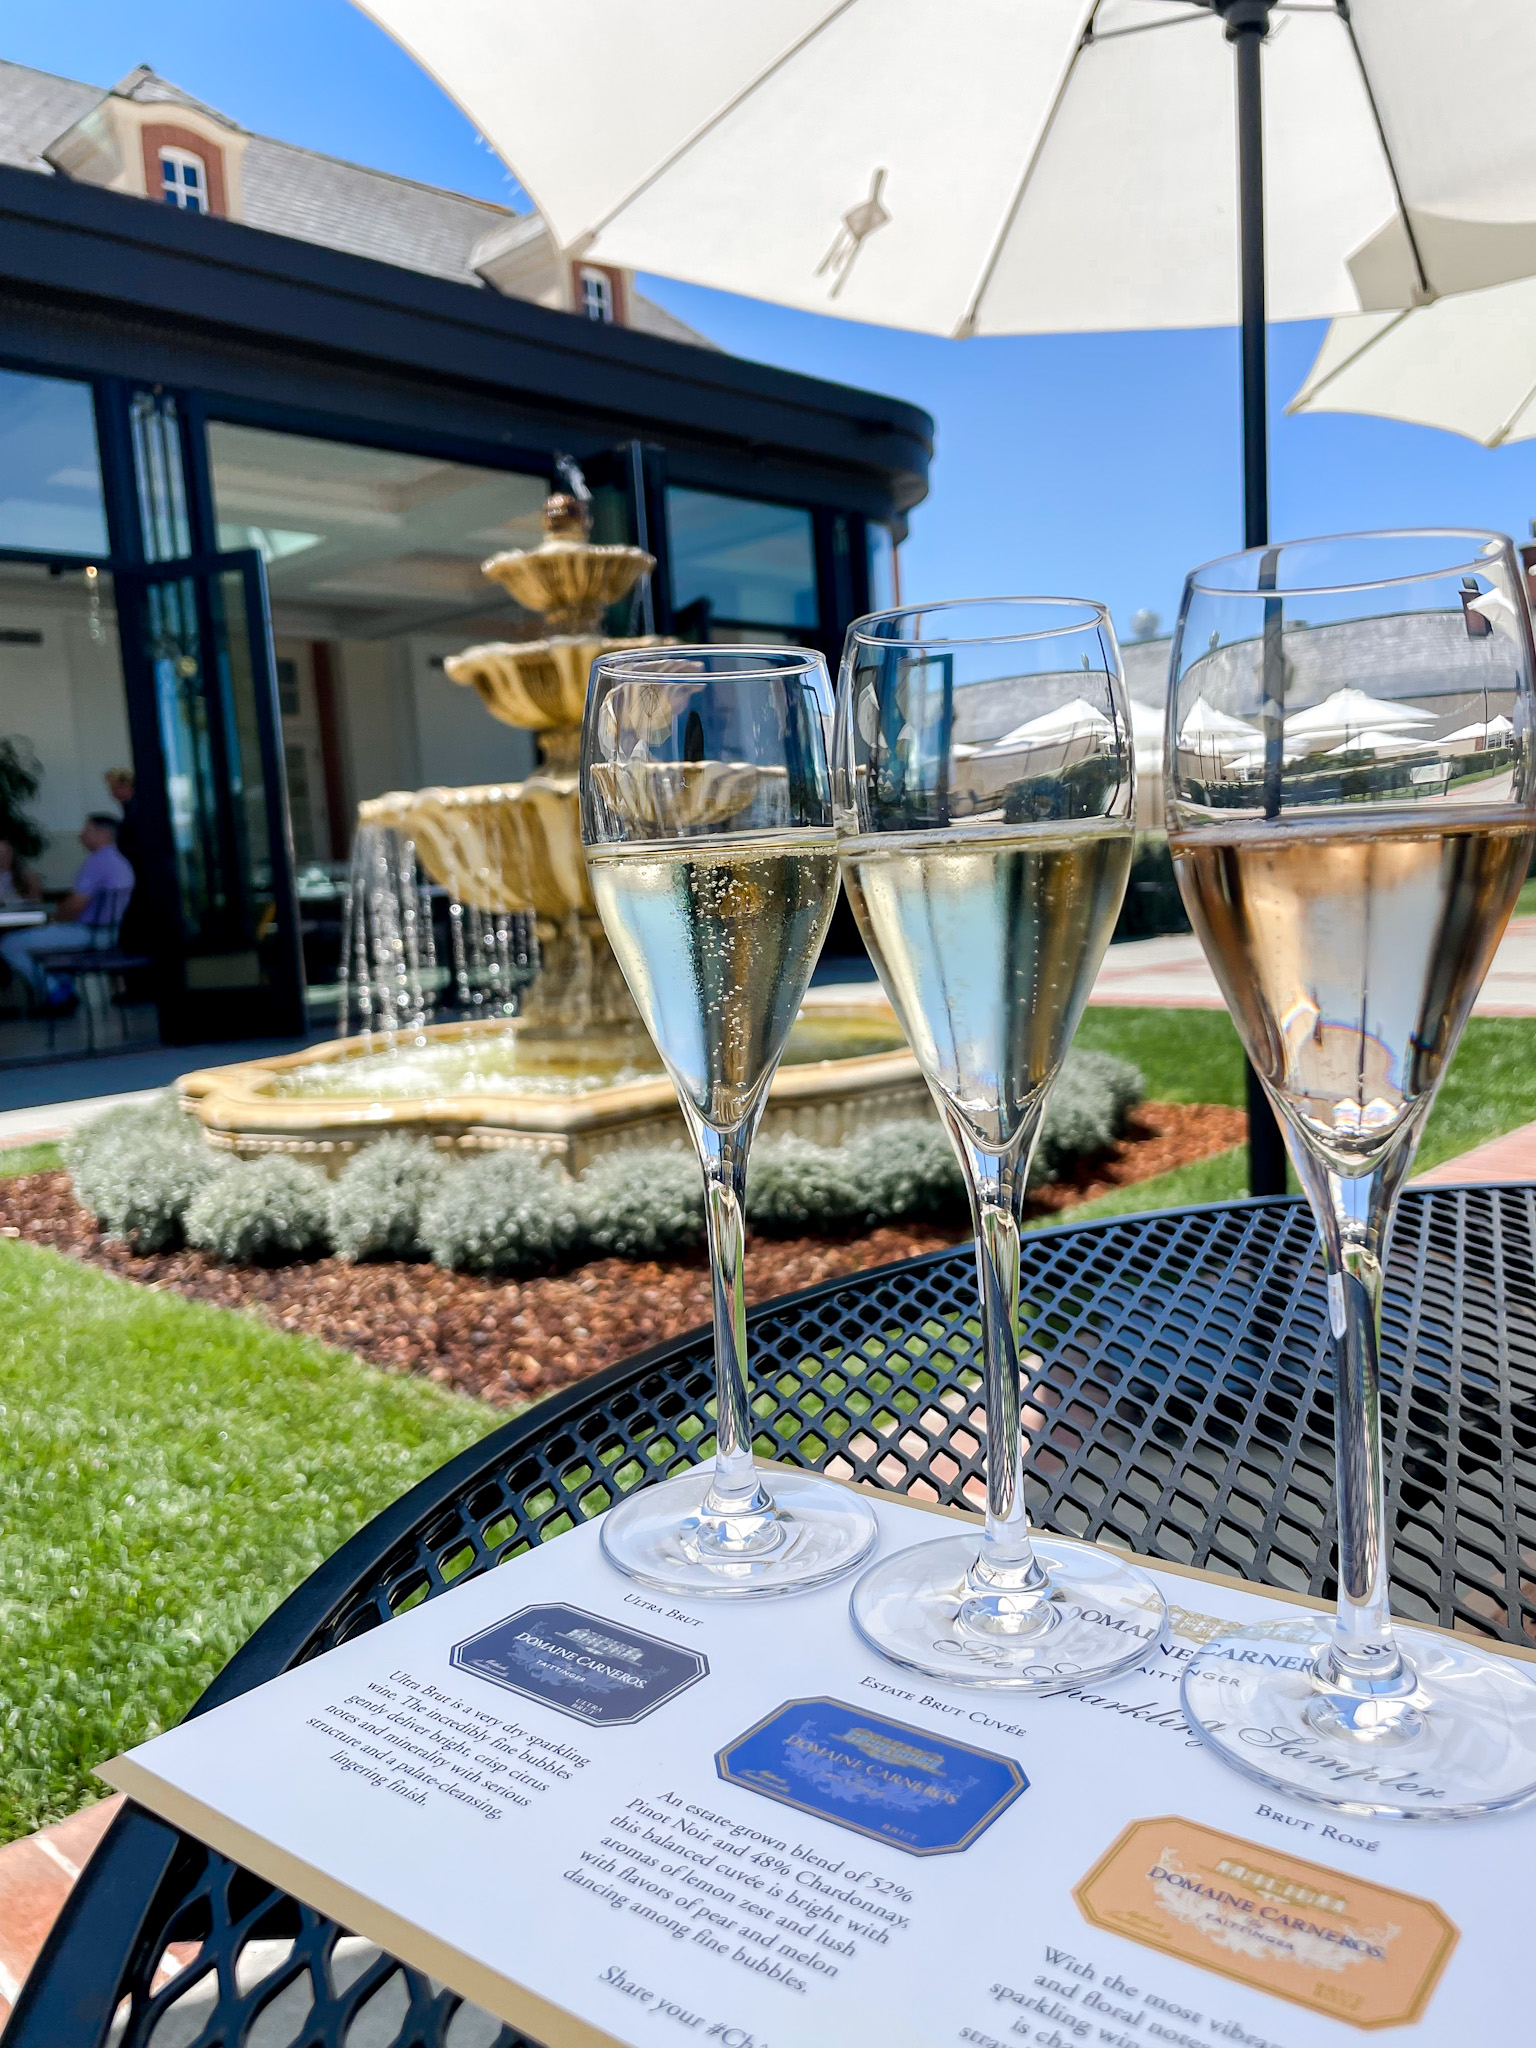 Glasses of champagne at Domaine Carneros winery in Napa